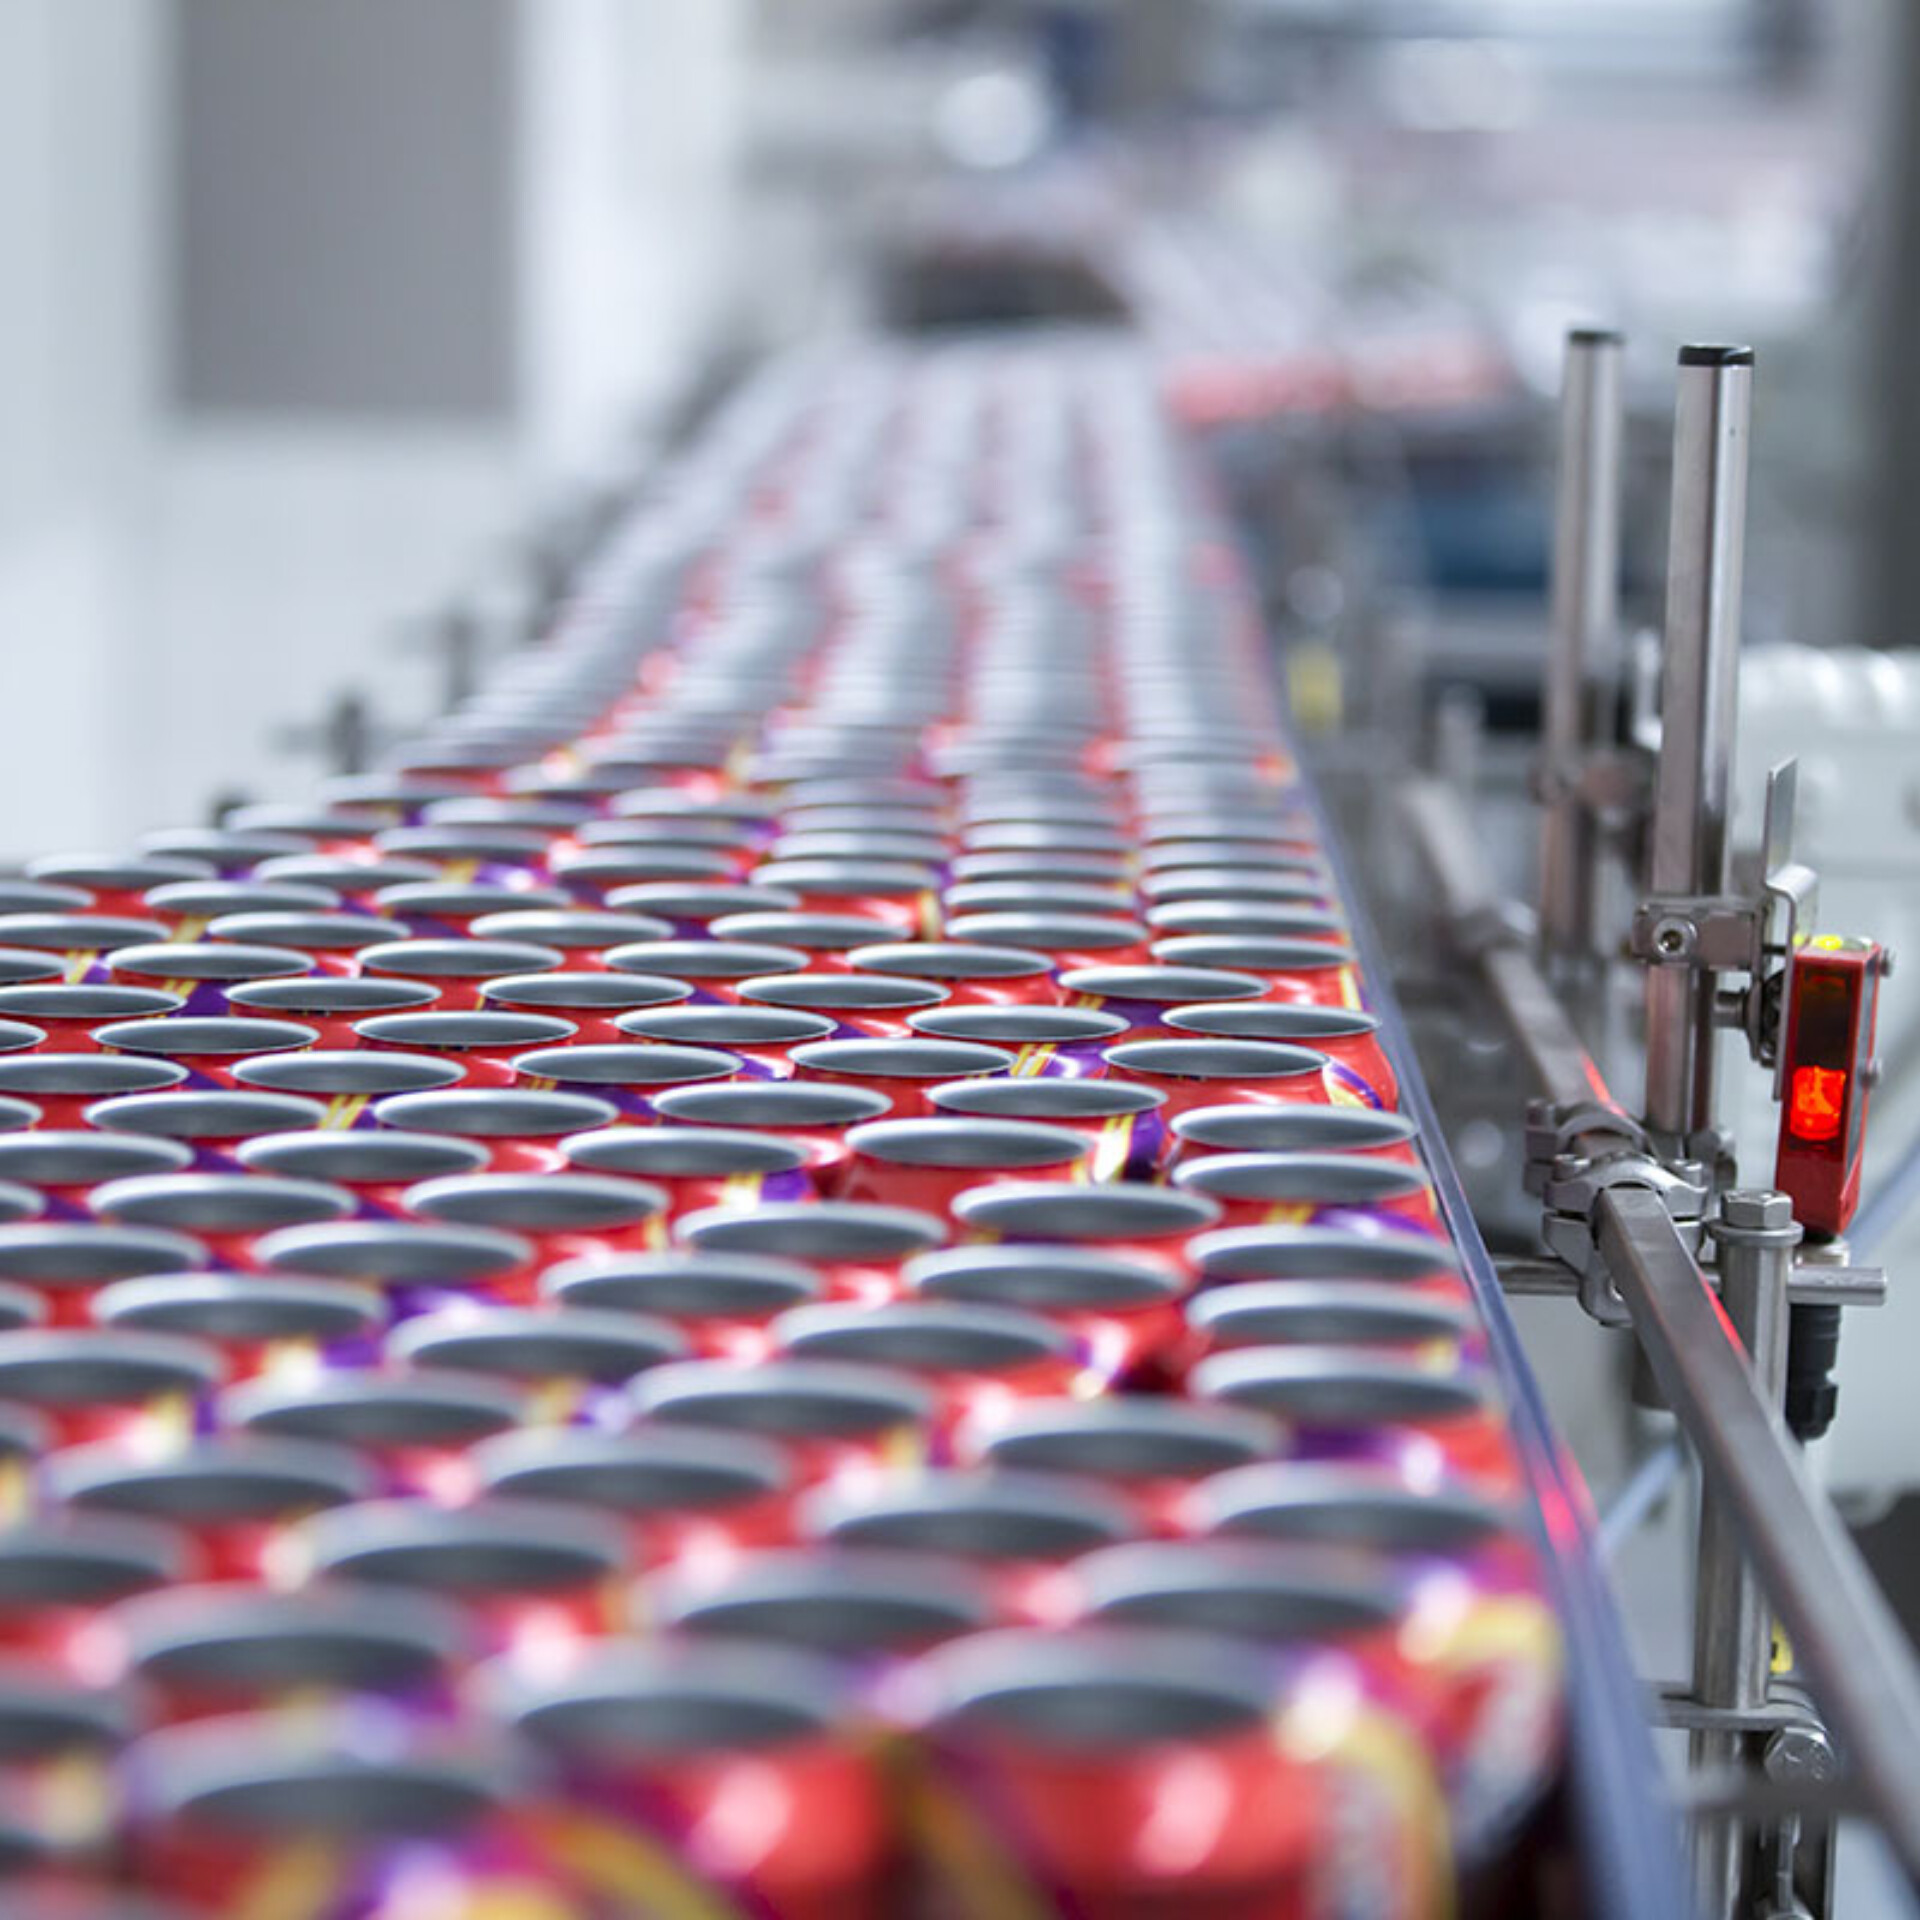 Cans on assembly line